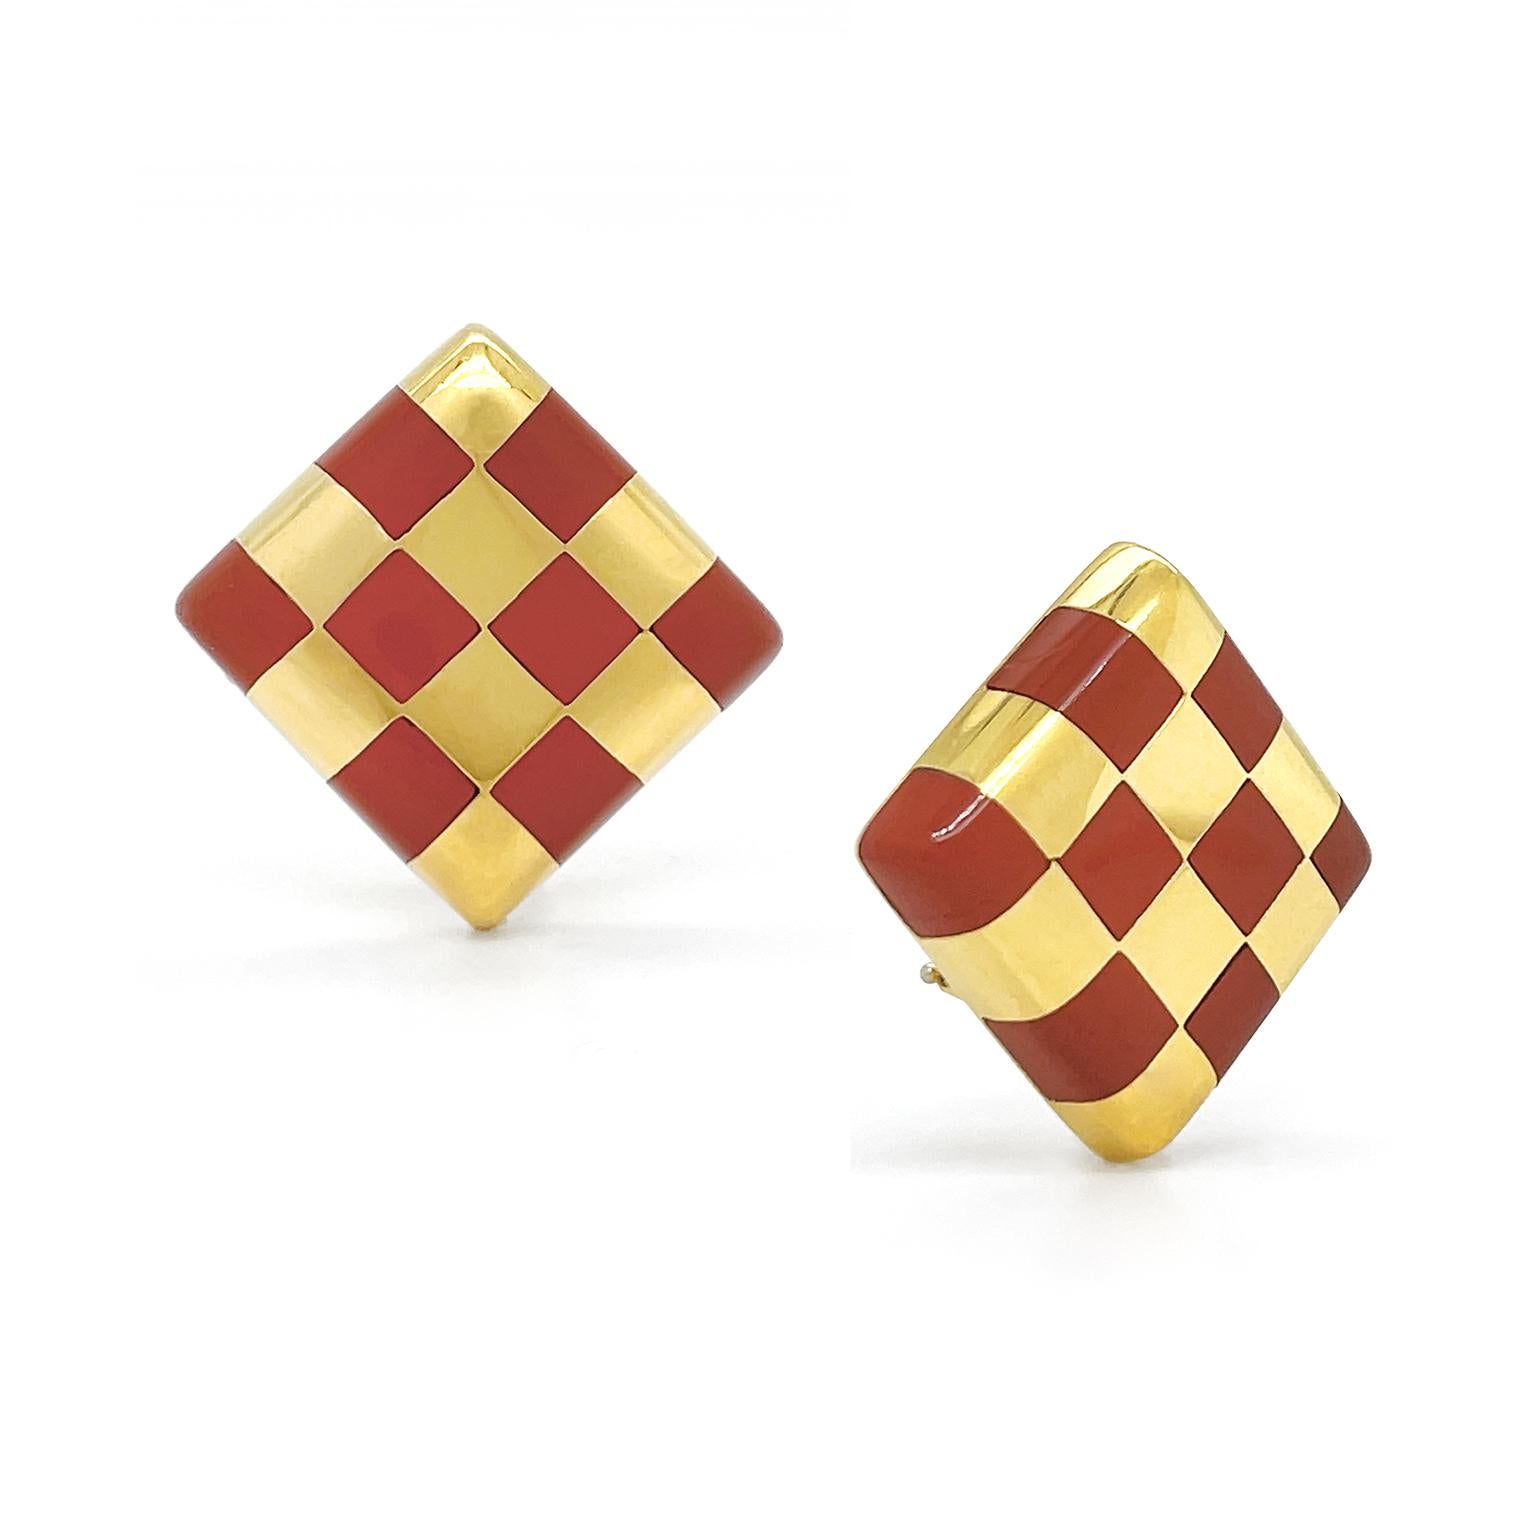 The classic checkerboard pattern is illustrated from a valued gem and gold. Red Jasper, known for its intense opacity, is carved into squares and inlaid in a rhombus of 18k yellow gold. The result is a distinct complement of color. Clip-backs finish